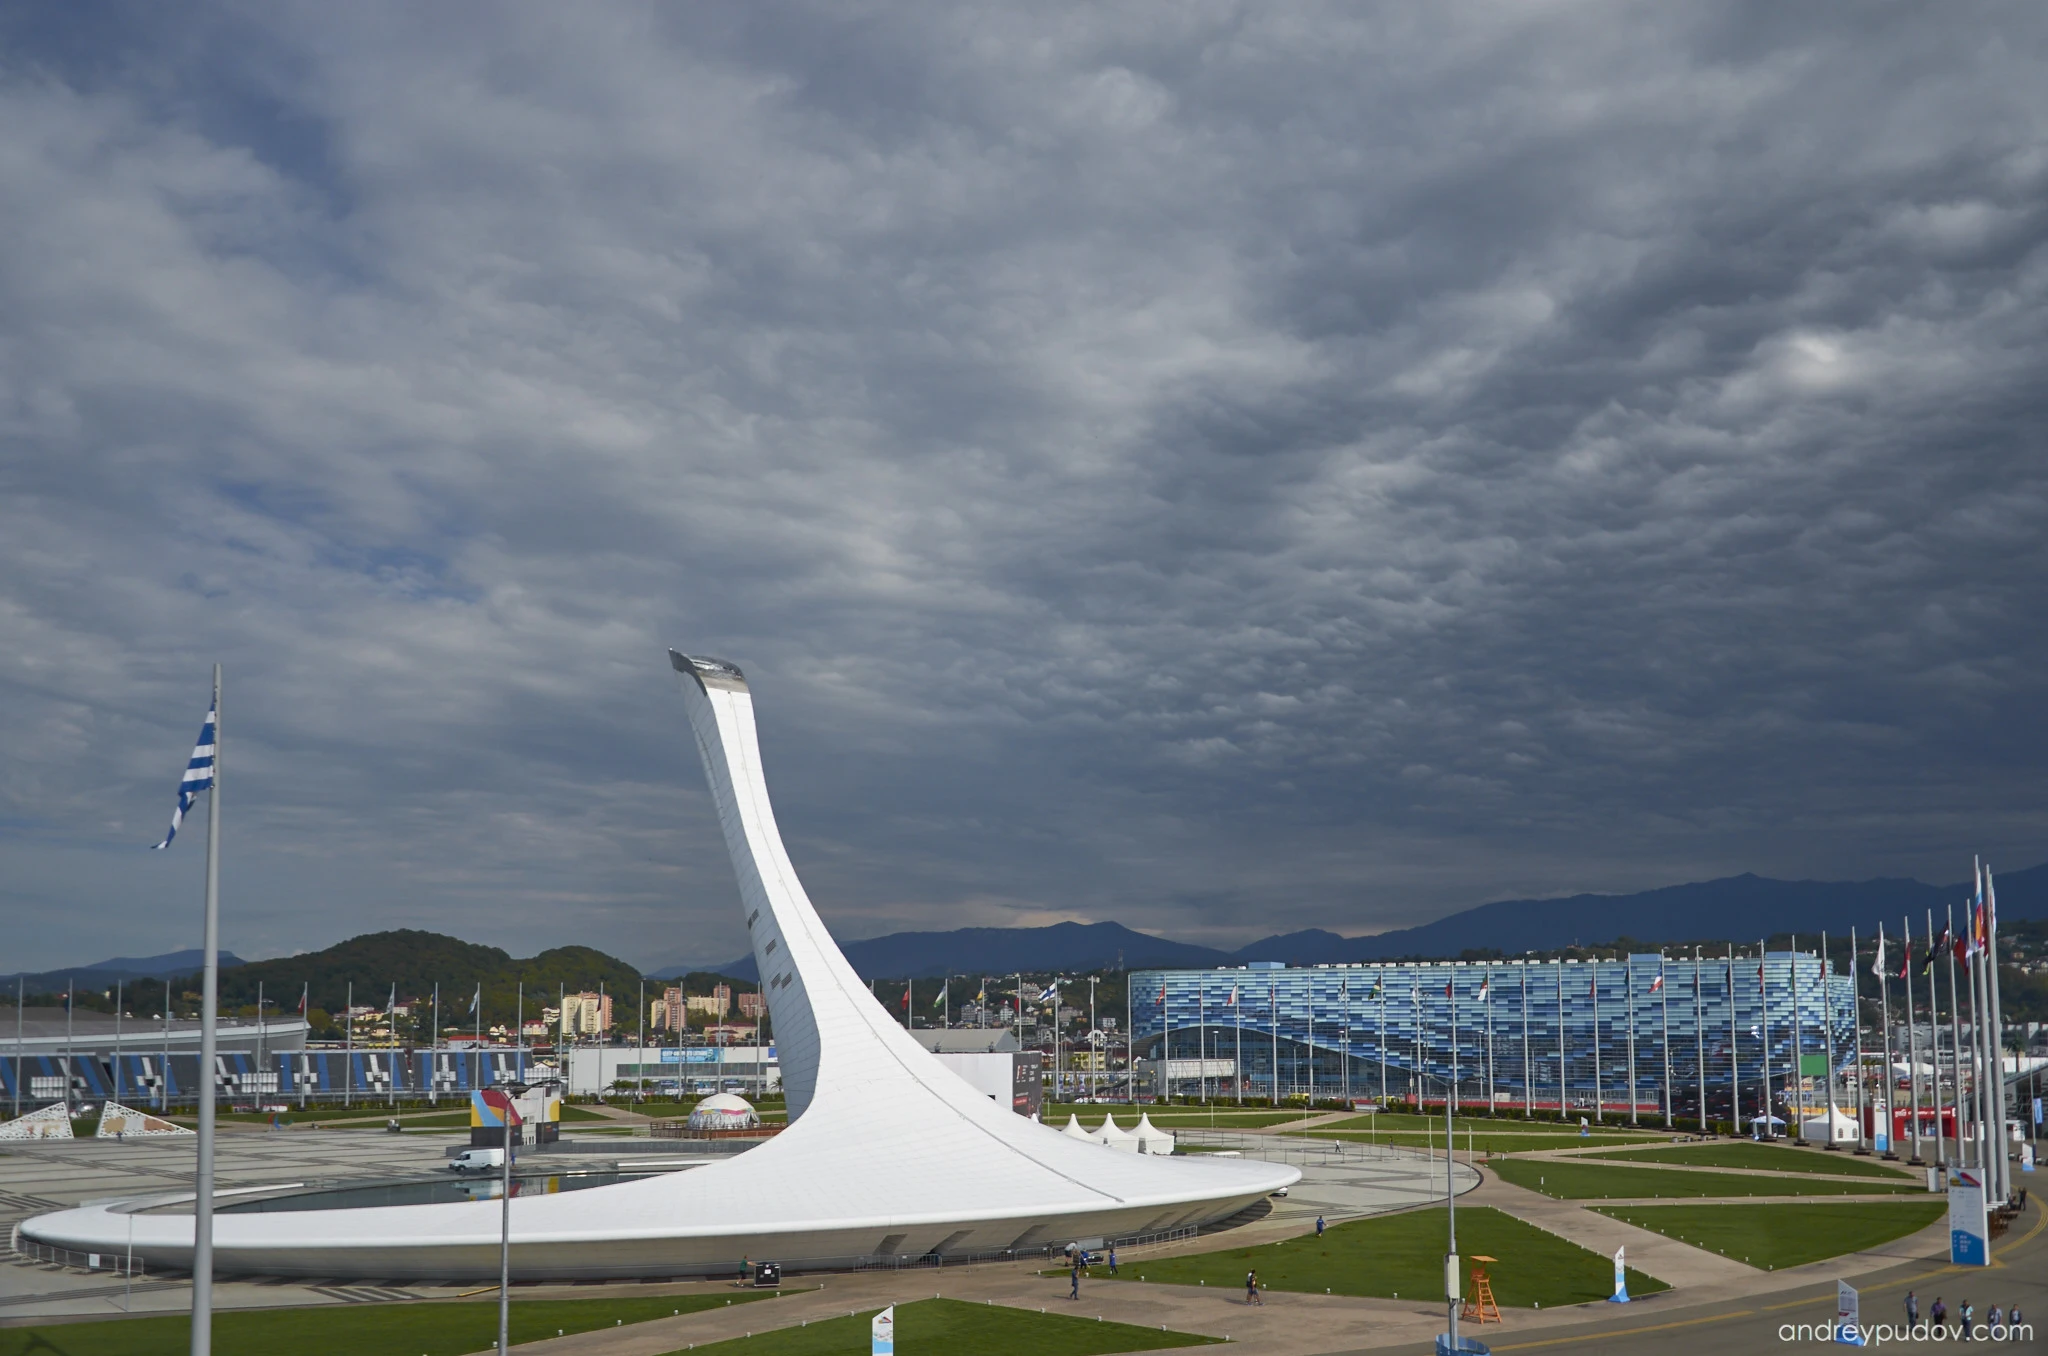 2015 Formula 1 Russian Grand Prix - Sochi Medals Plaza

Centrally located within the Sochi Olympic Park sports venues, the Sochi Medals Plaza is located near the Fisht Olympic Stadium, the Black Sea coast, and was the cauldron for the Olympic Flame. It is surrounded by a large water basin.

Every night, the medals of the 2014 Winter Olympics were awarded there. The stage will remain with legacy footsteps on it which will permanently record the names of all the medal winners. During the Olympics, the venue temporarily could accommodate 20,000 standing spectators.

The plaza now shapes corners 2-5 of the Sochi Autodrom motor-racing circuit. The entire circuit snakes around other structures in the Sochi Olympic Park.